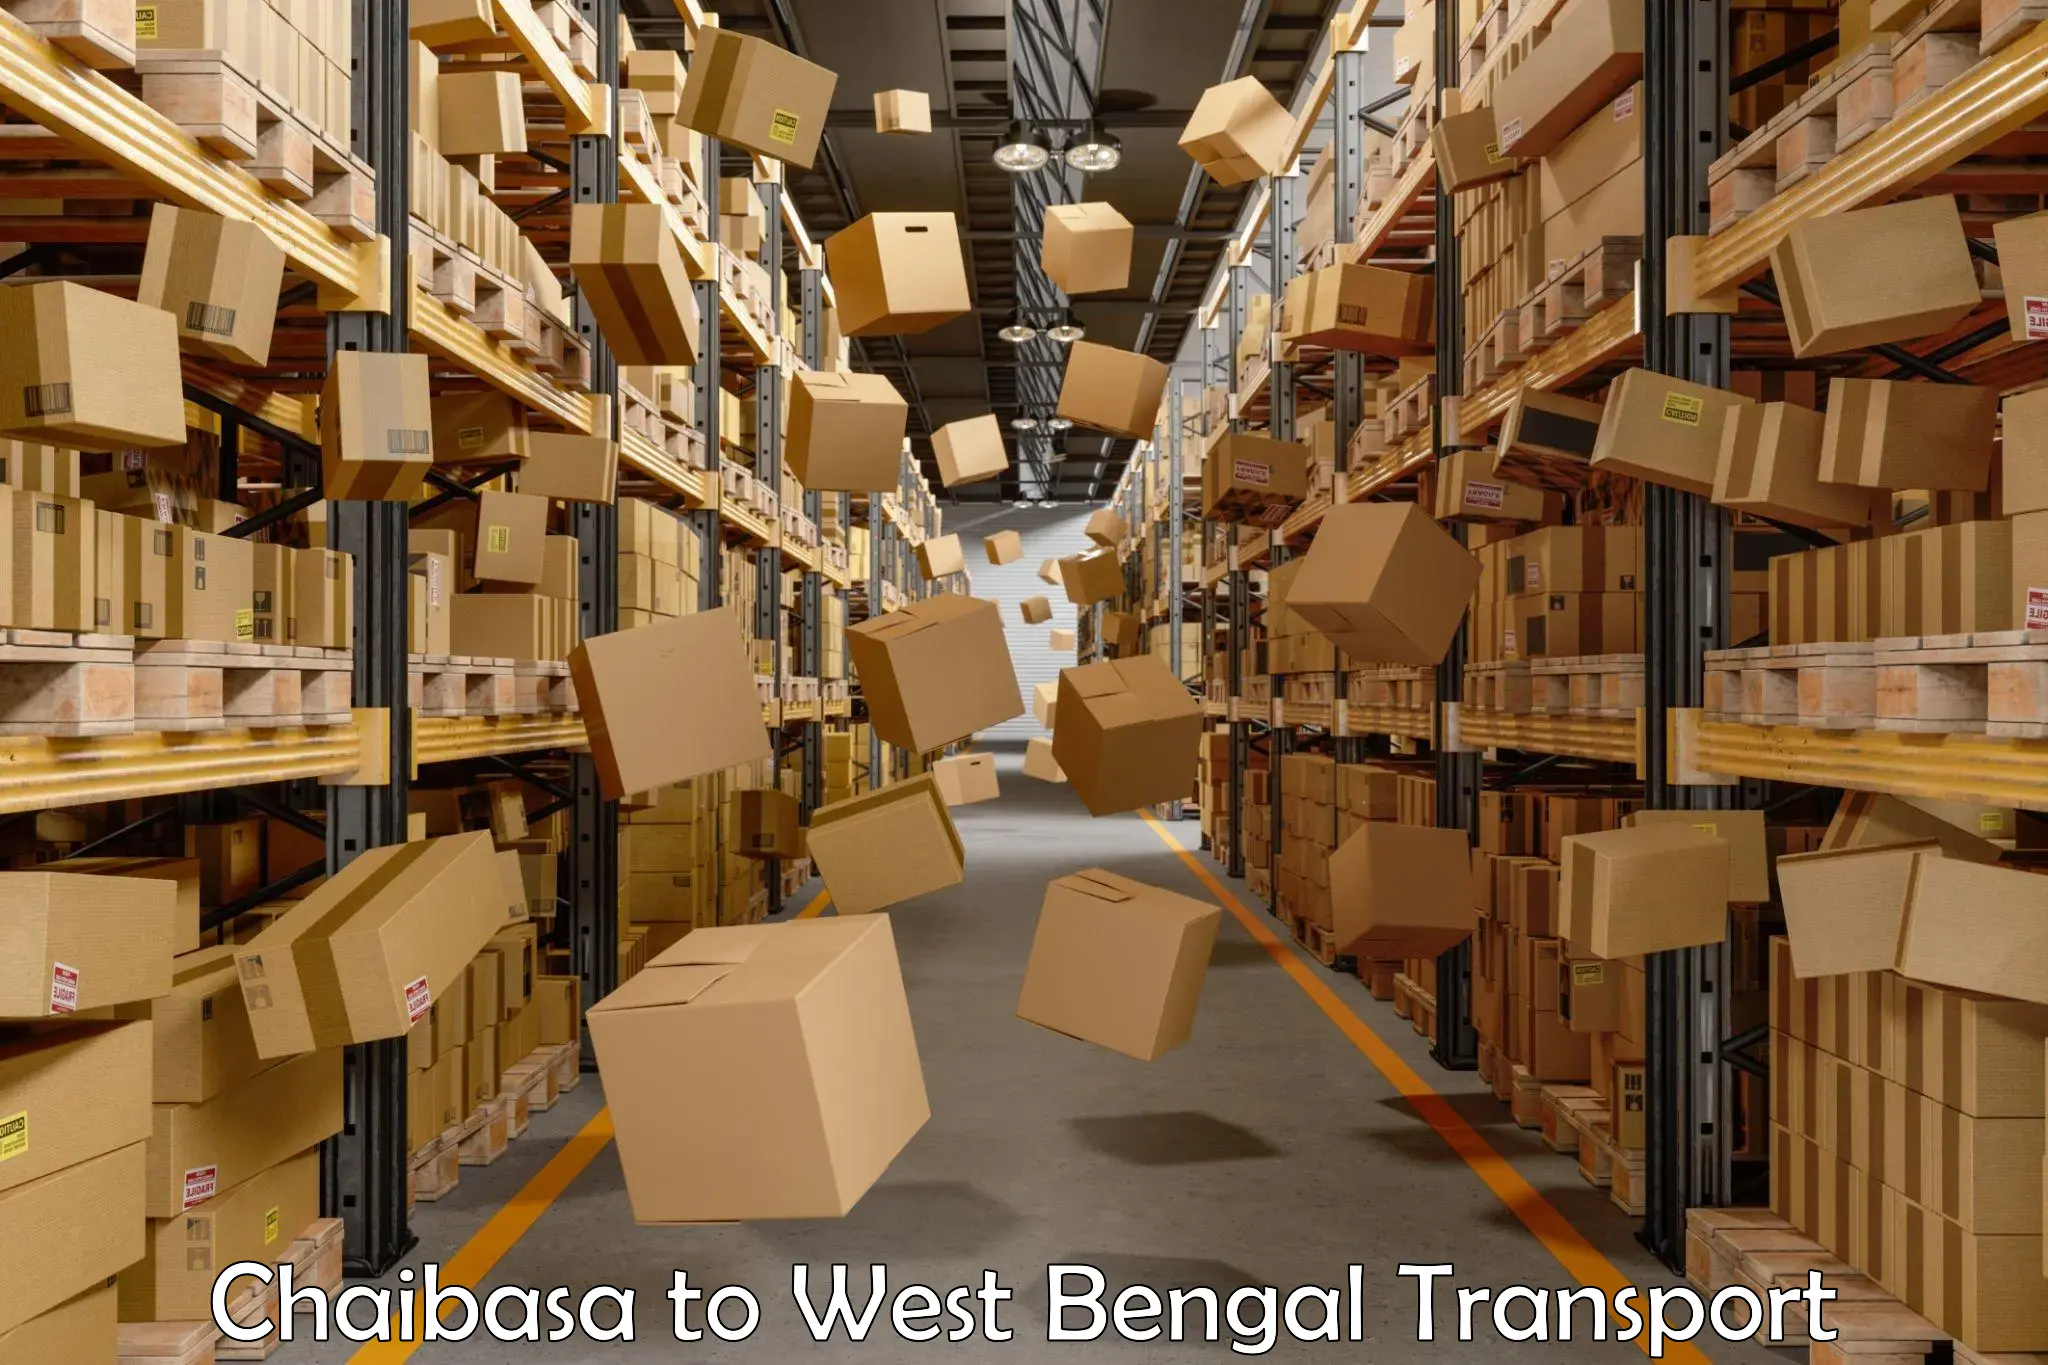 Truck transport companies in India Chaibasa to Mirzapur Bardhaman